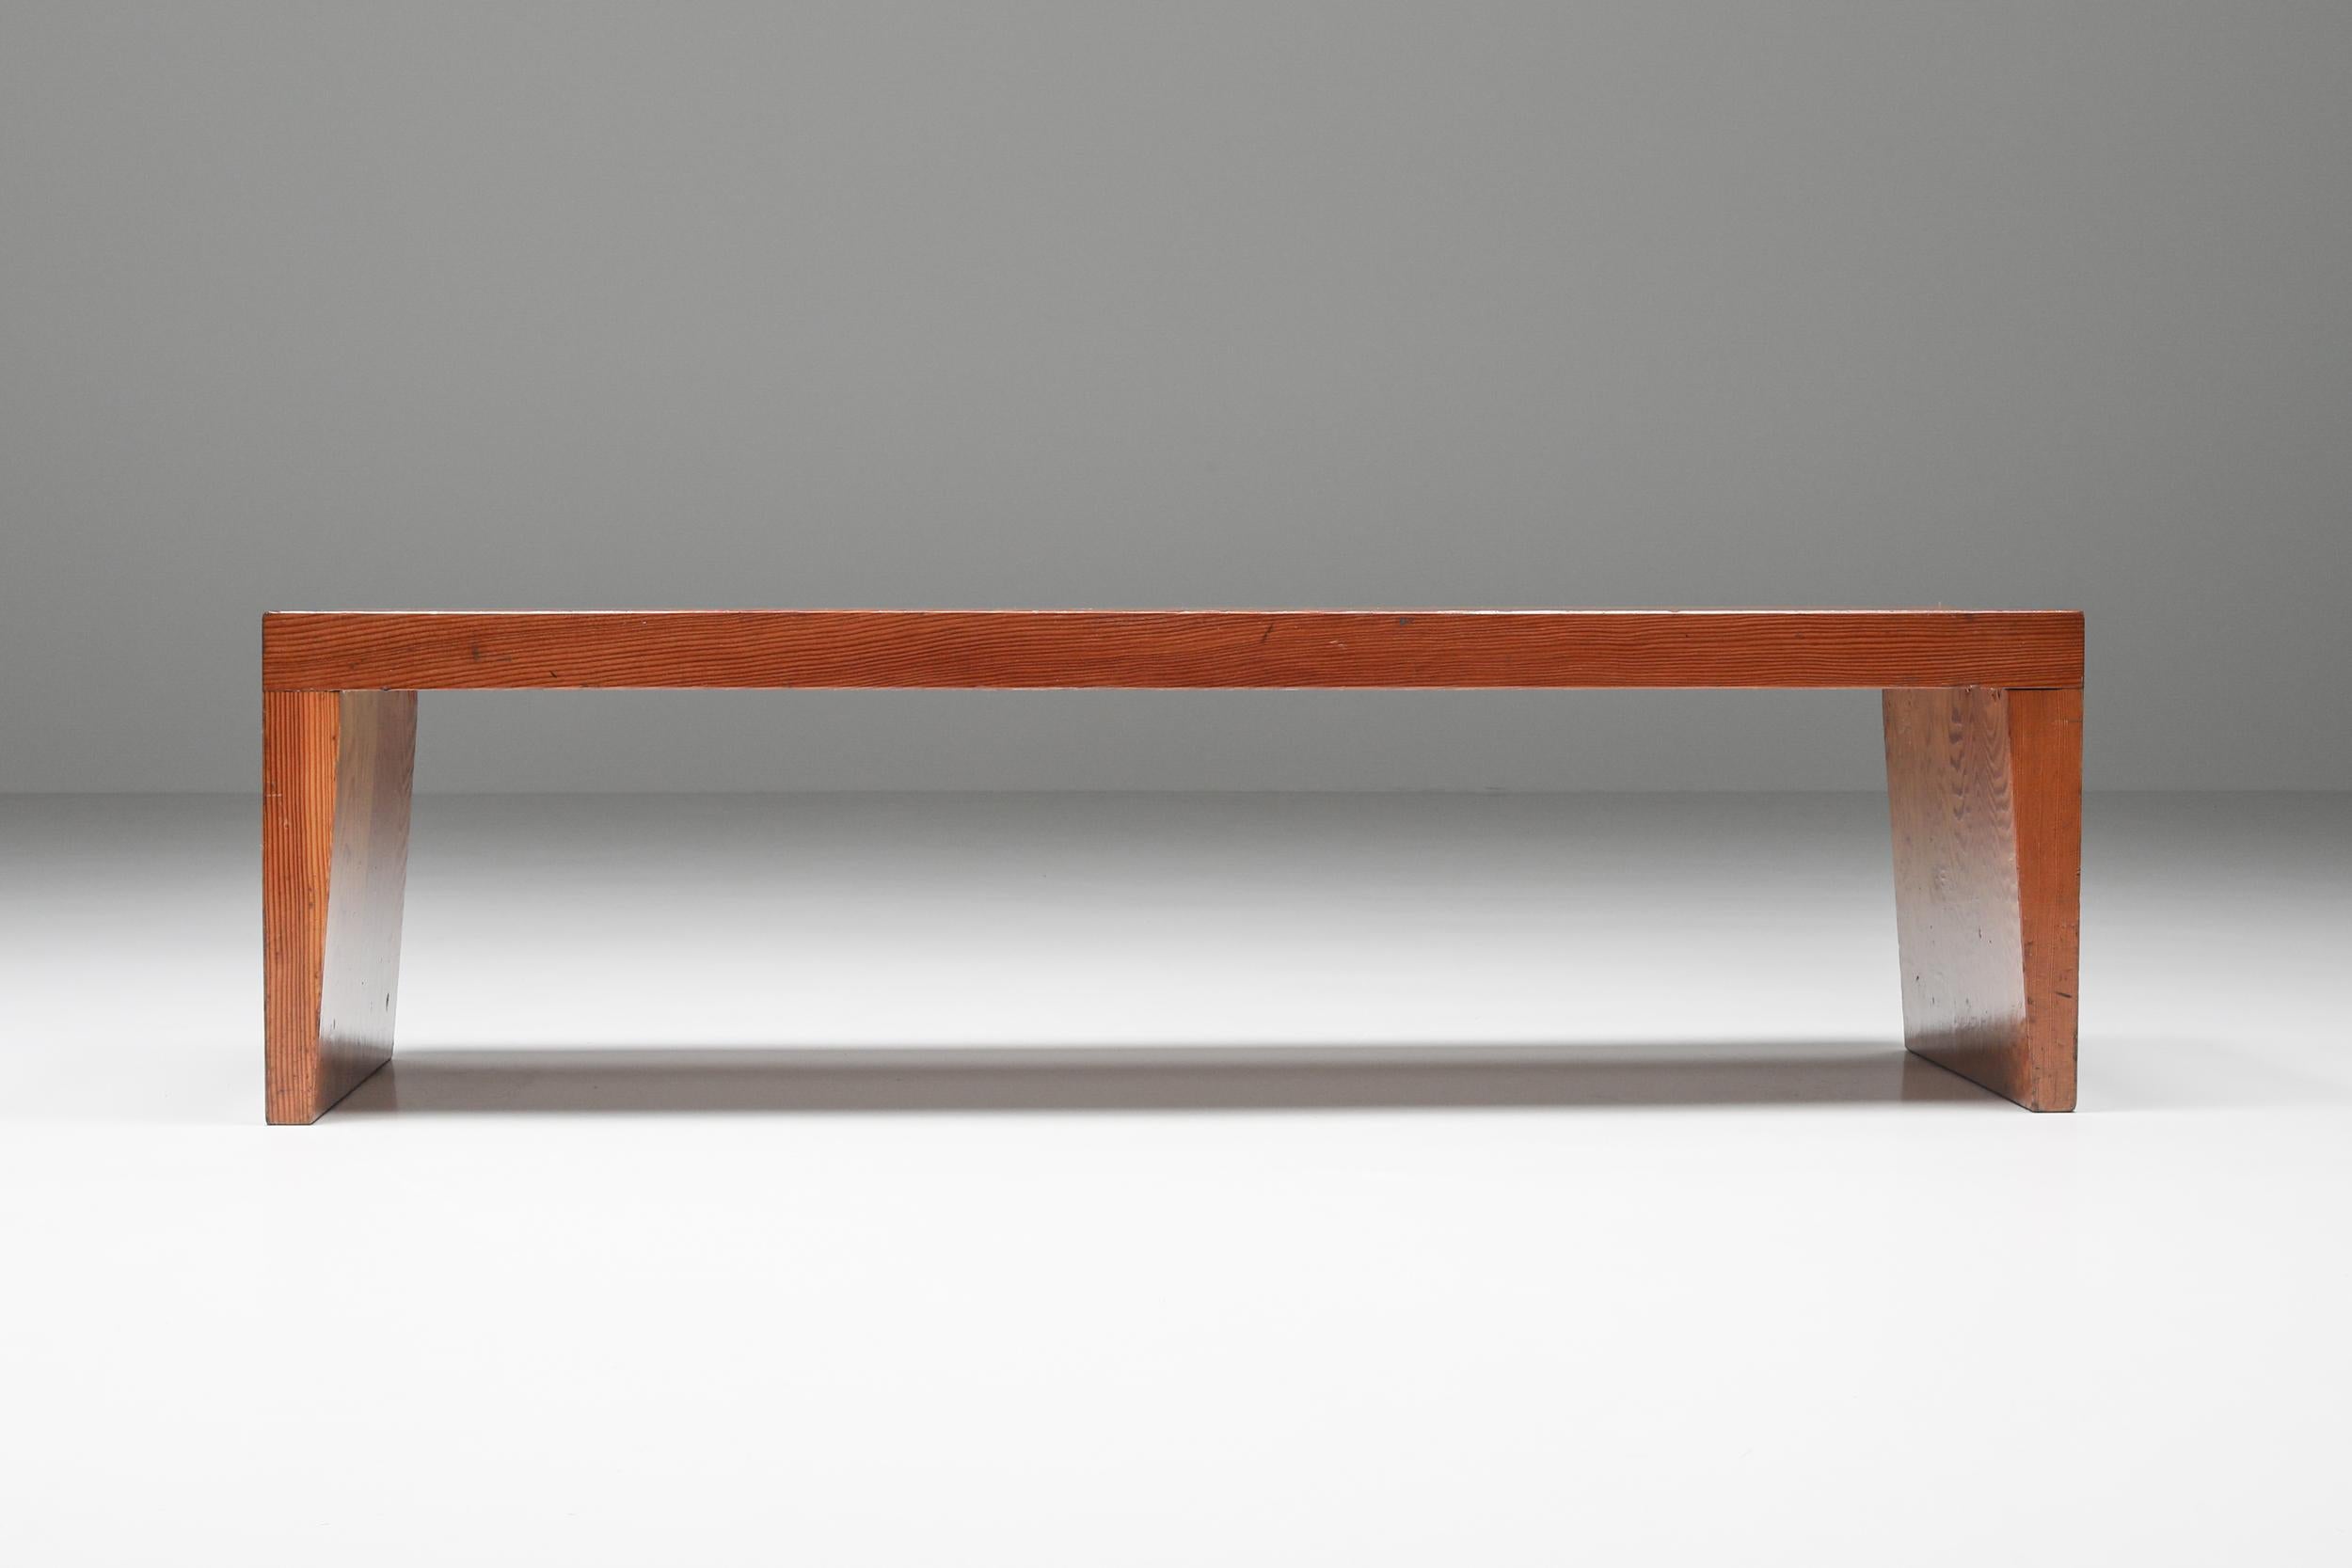 Minimalist, Church Bench Mid-Century Modern, Monumental, Wood, Joinery, Antique, Herefordshire Chapel, Pews, 19th century, 1950's, Donald Judd; 

Monumental minimalist Church bench in solid wood with incredible joinery system that holds the three